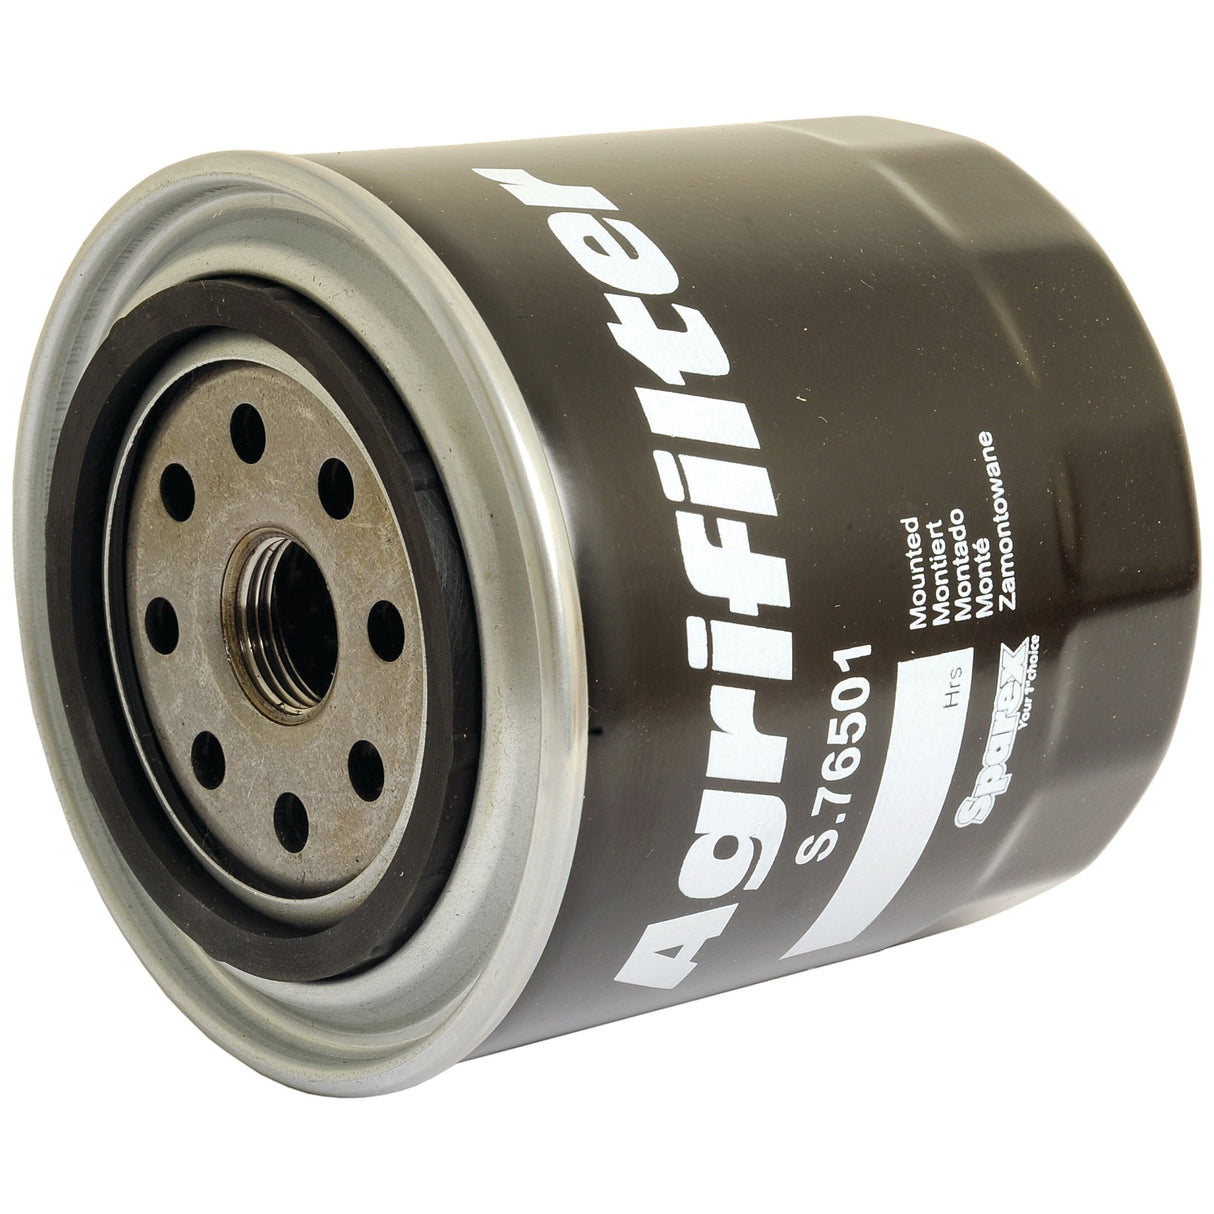 Oil Filter - Spin On -
 - S.76501 - Farming Parts